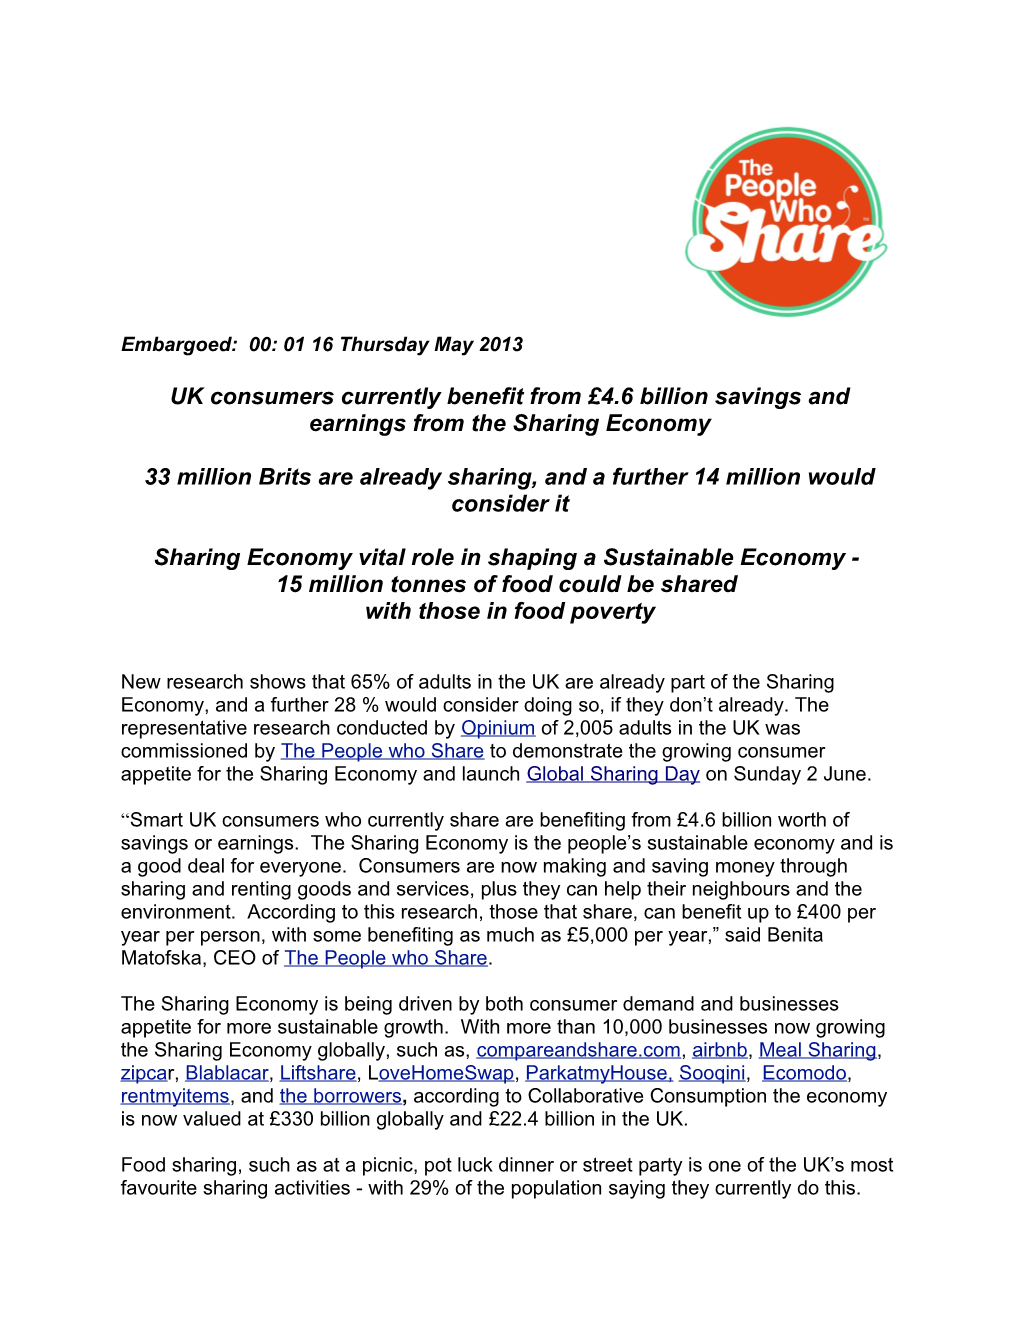 33 Million Brits Are Already Sharing, and a Further 14 Million Would Consider It